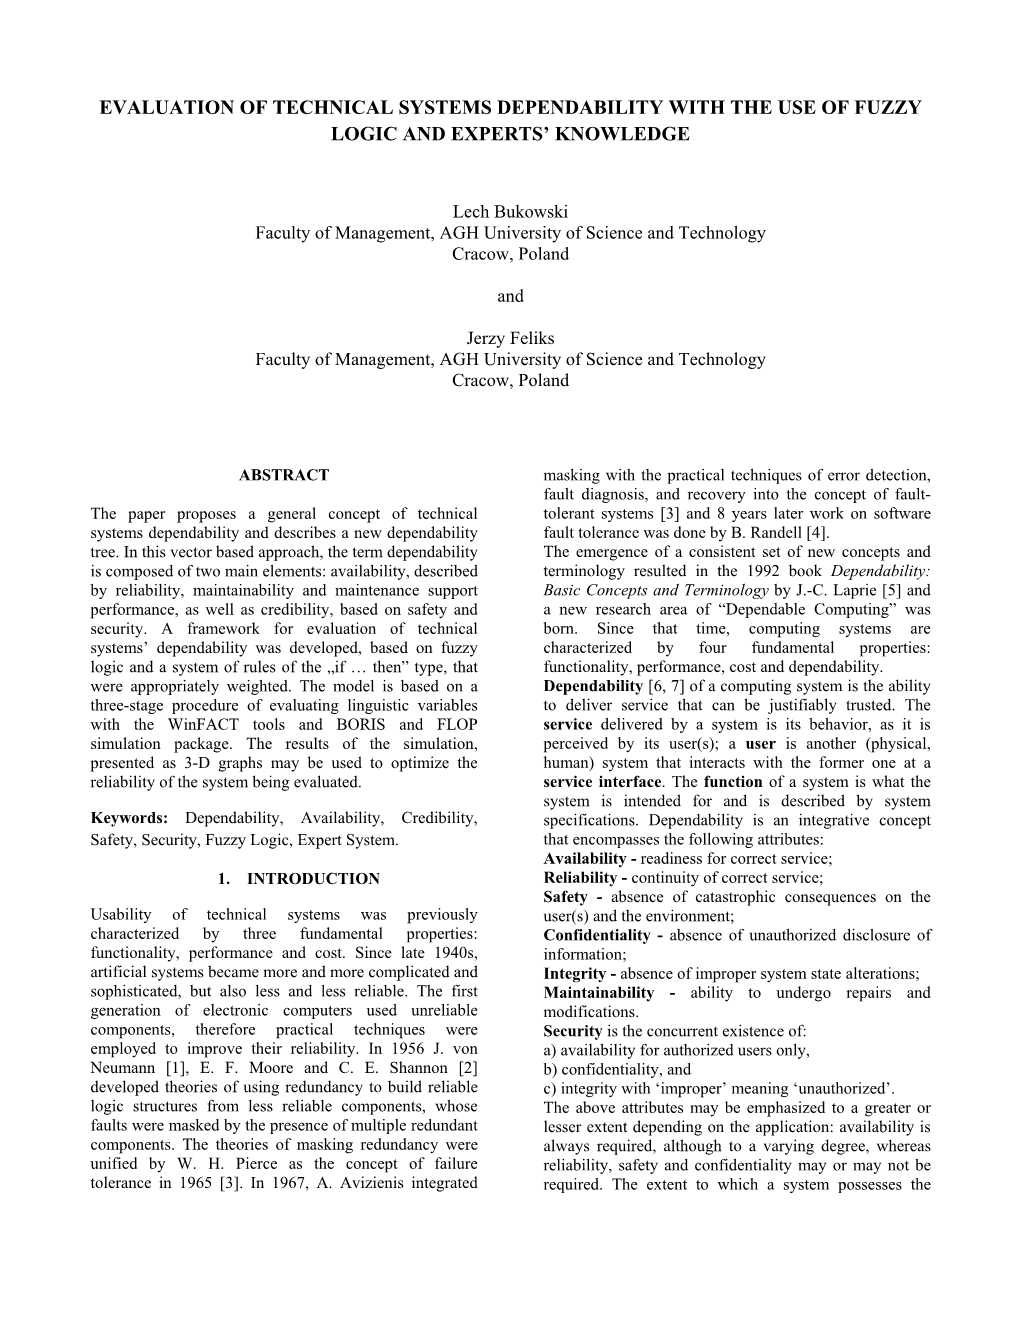 Evaluation of Technical Systems Dependability with the Use of Fuzzy Logic and Experts’ Knowledge